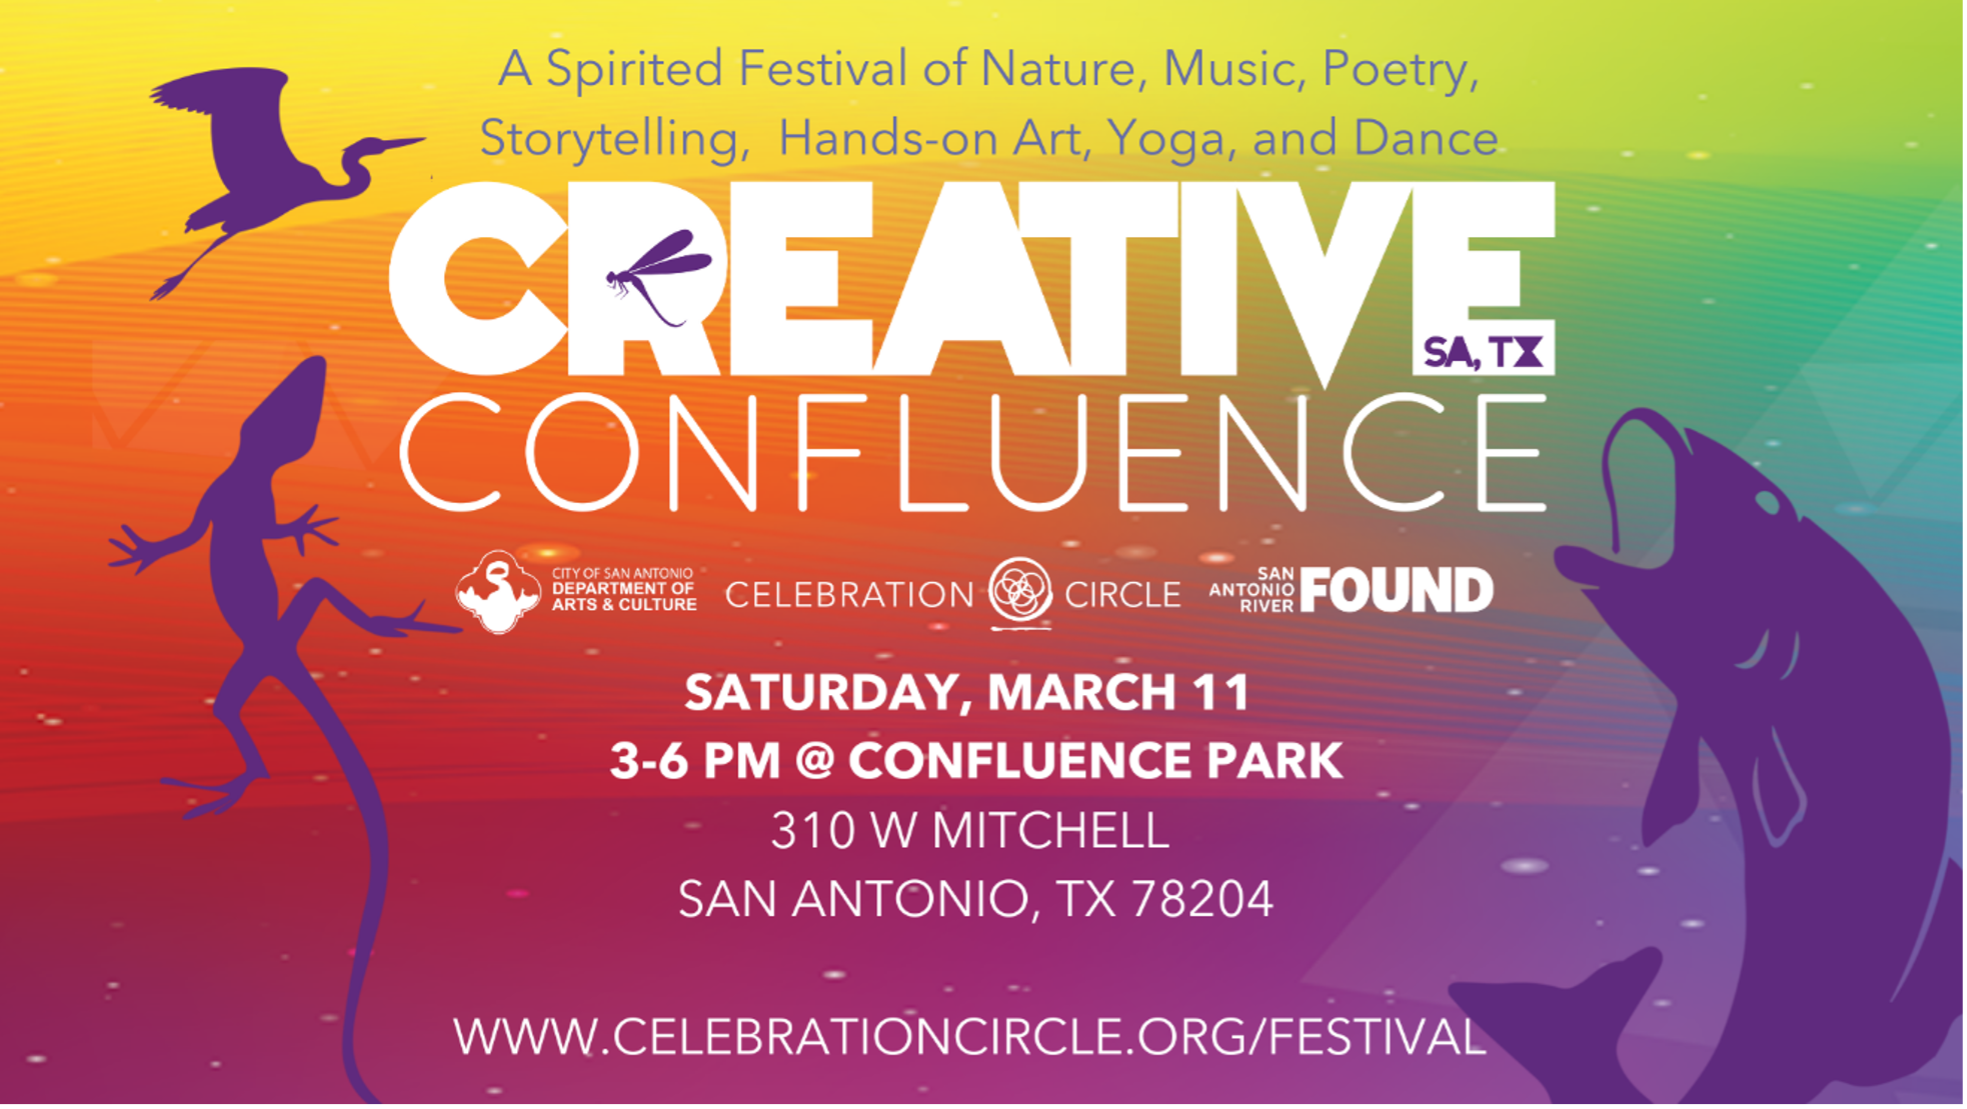 Creative Confluence Saturday March 11 at Confluence Park